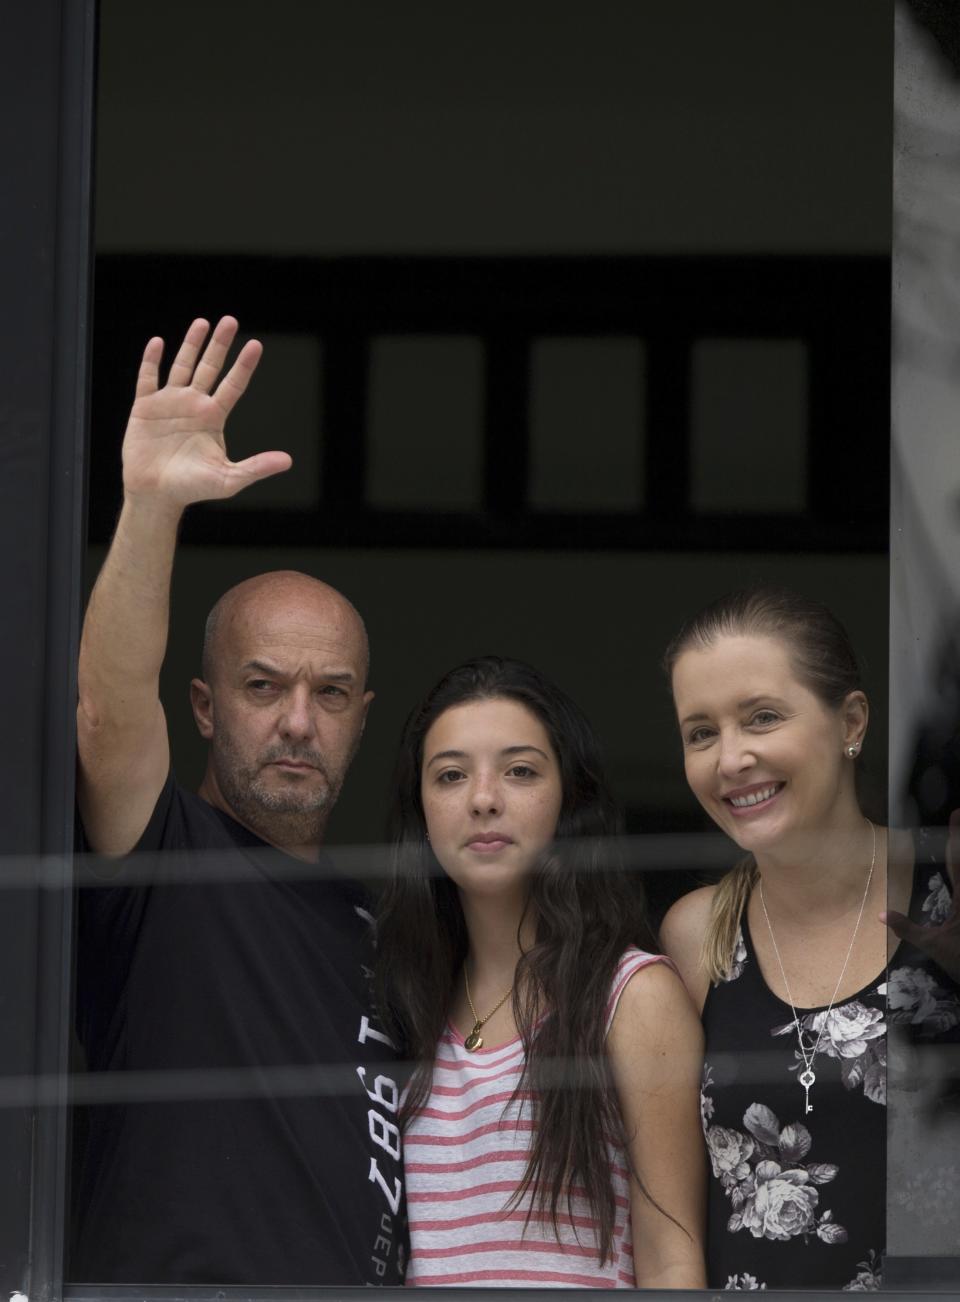 FILE - In this Sept. 20, 2014 file photo, Ivan Simonovis, former Caracas police chief, waves to the media from the balcony of his home, accompanied by his daughter Ivana, center, and wife Bony, in Caracas, Venezuela, after he was released from jail on humanitarian grounds to continue serving a 30-year sentence at home. Simonovis had been jailed since 2004 in connection with the death of pro-government protesters who had rushed to the defense of then-President Hugo Chavez during a failed coup attempt two years earlier. In 2009, he was convicted of aggravated murder. (AP Photo/Fernando Llano, File)